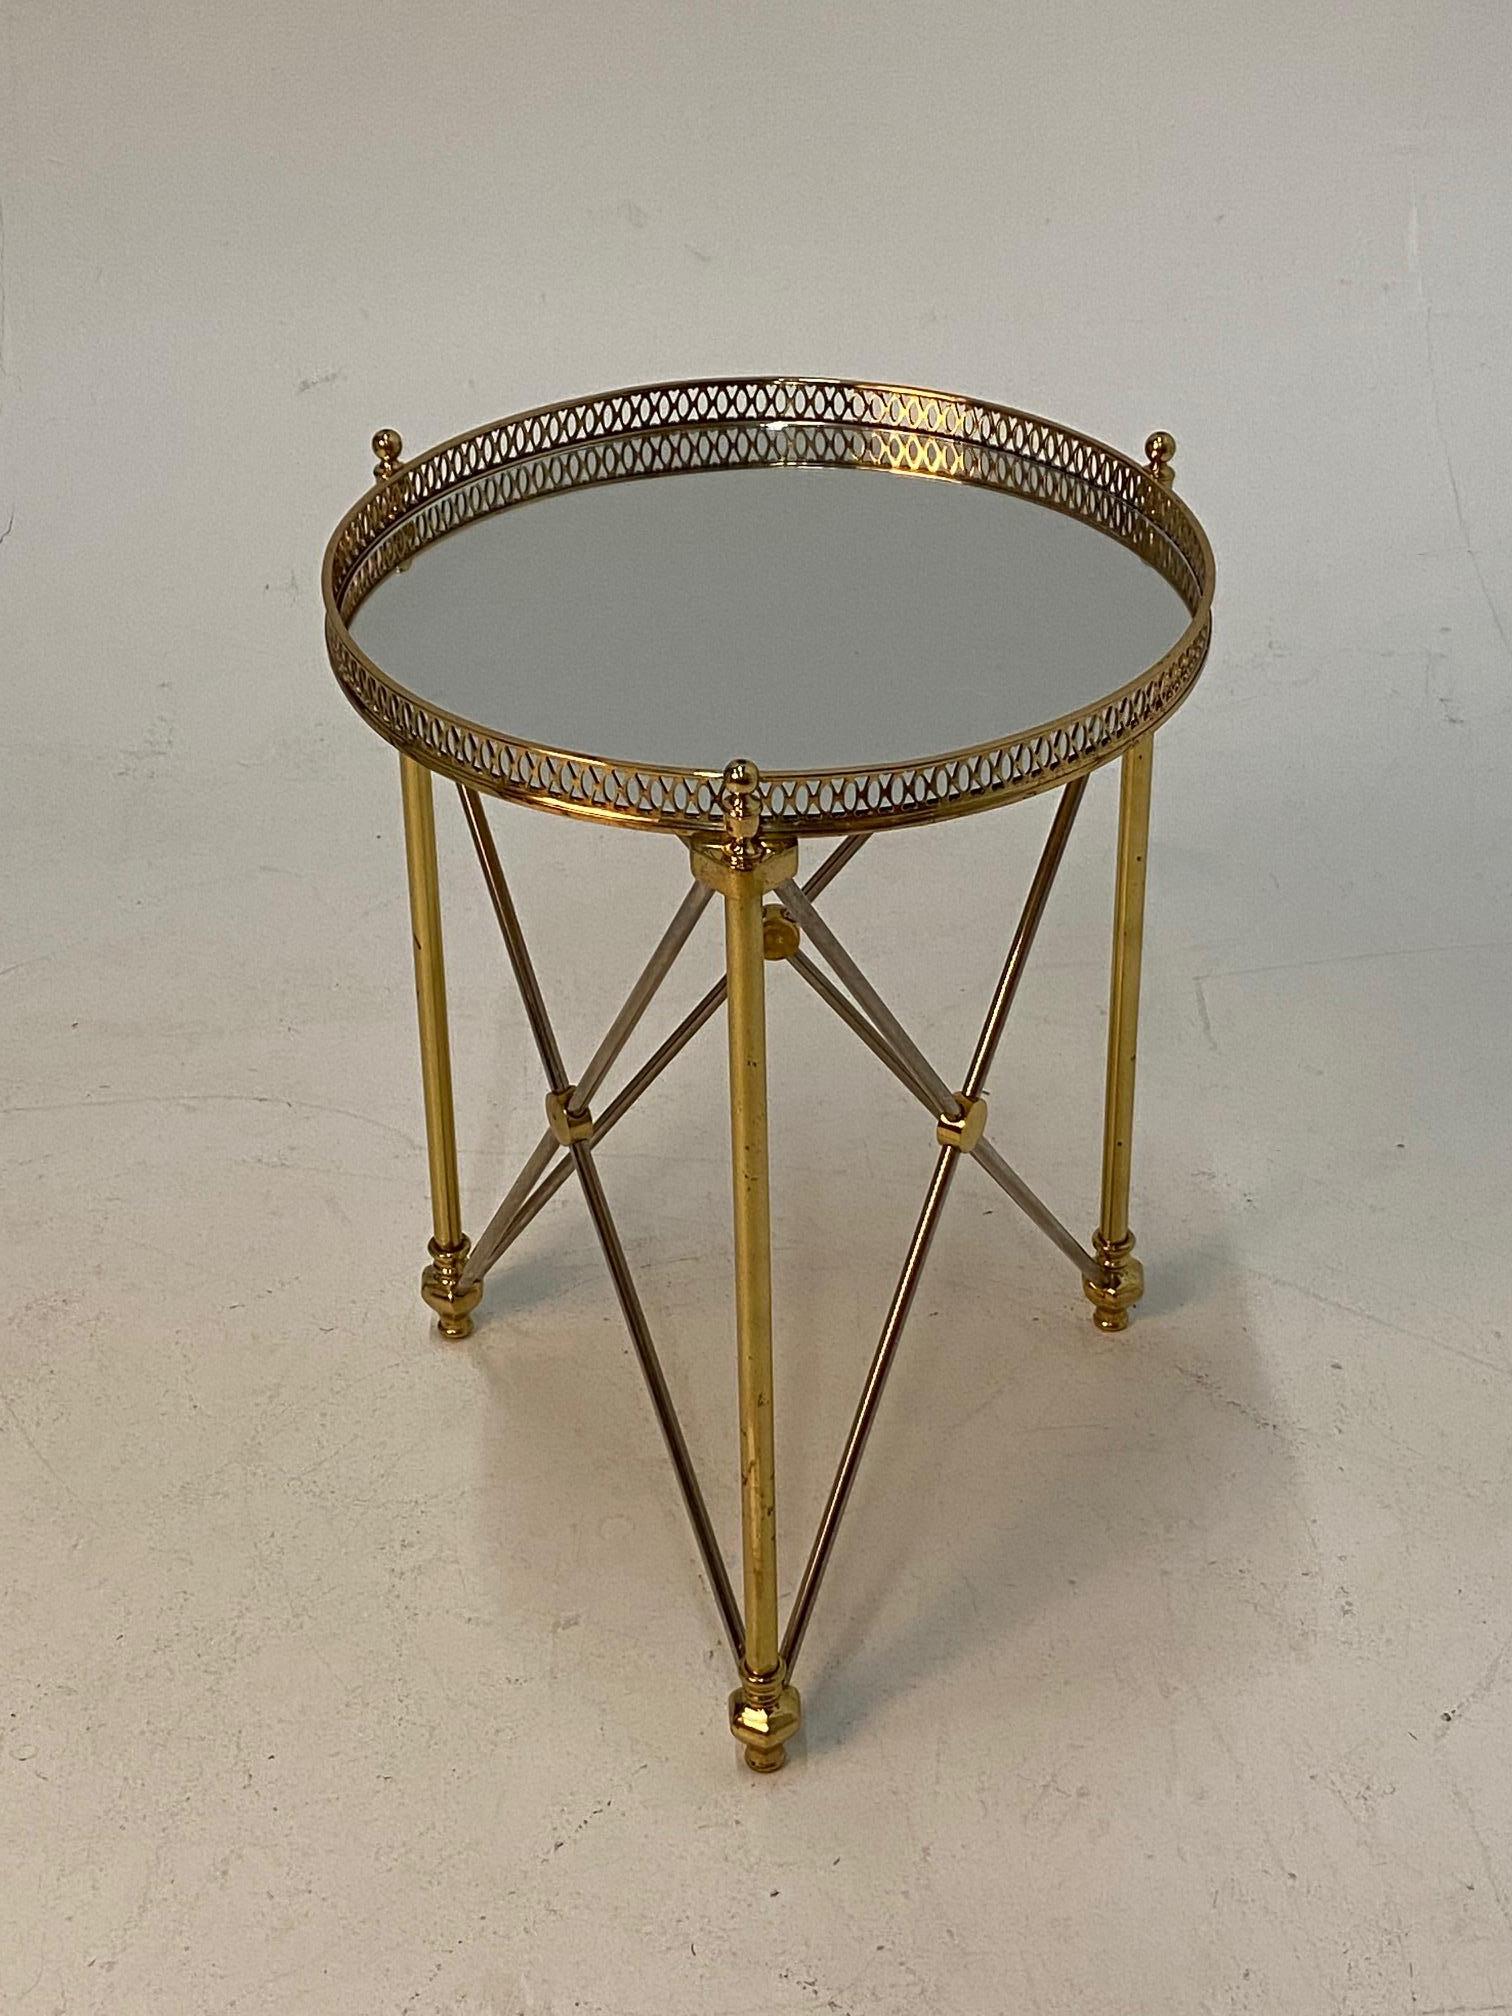 Elegant round martini table in the style of Maison Jansen having polished steel and brass neoclassical design, pierced gallery and mirrored top.